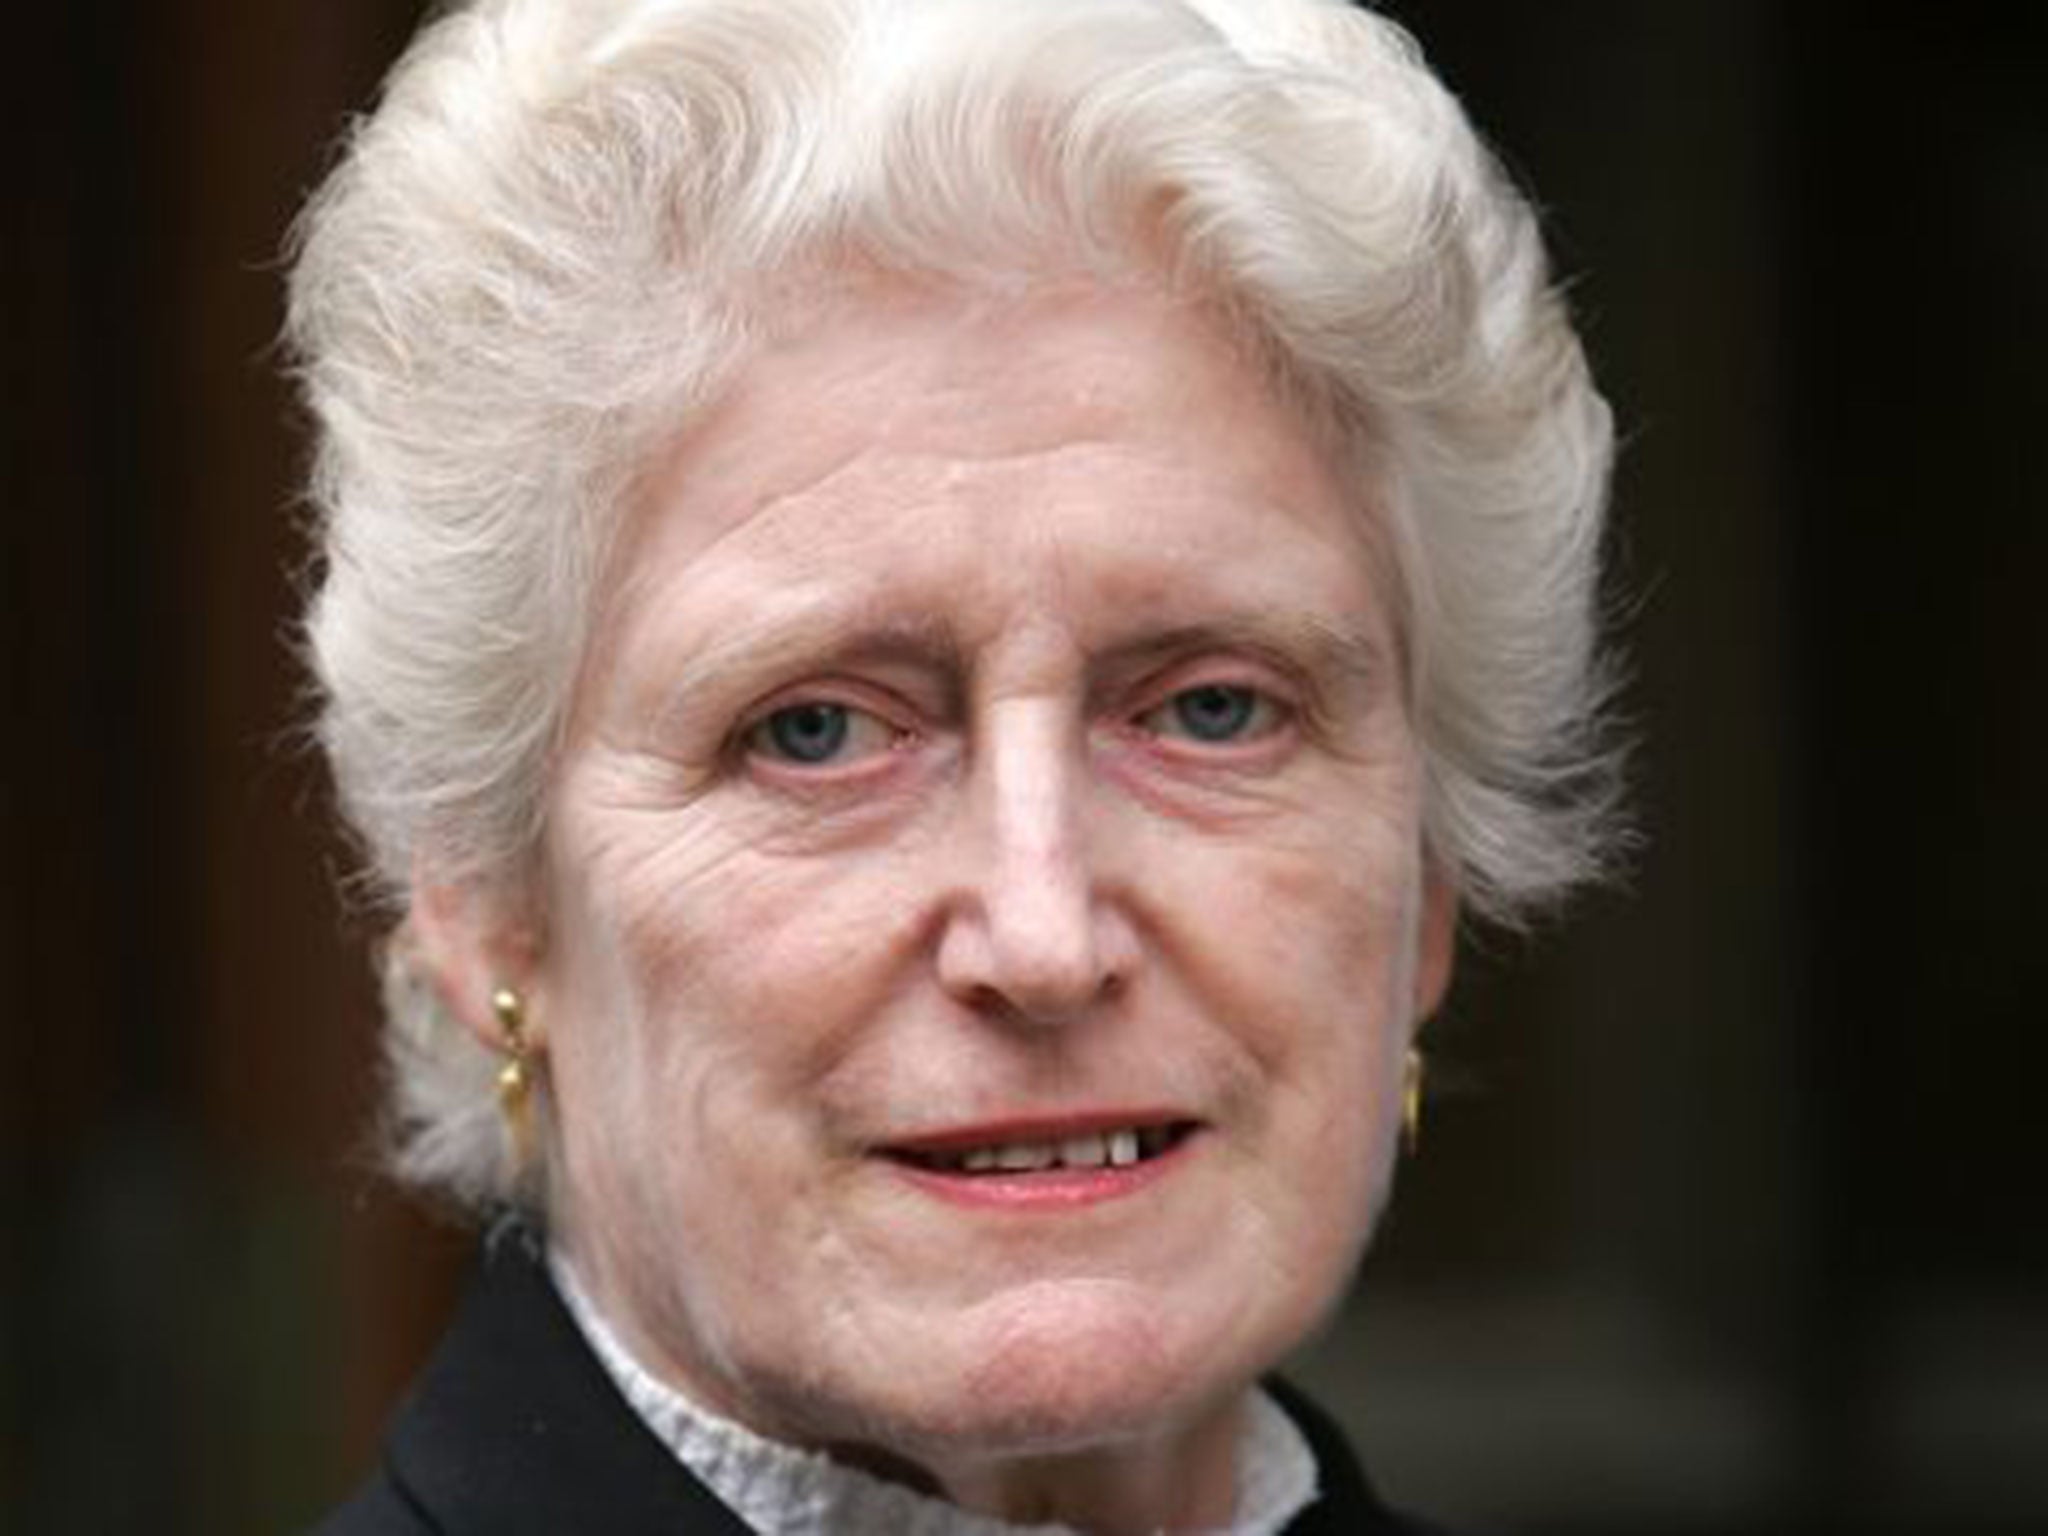 Baroness Butler-Sloss has today stepped down as chairman of a wide-ranging inquiry into child abuse claims